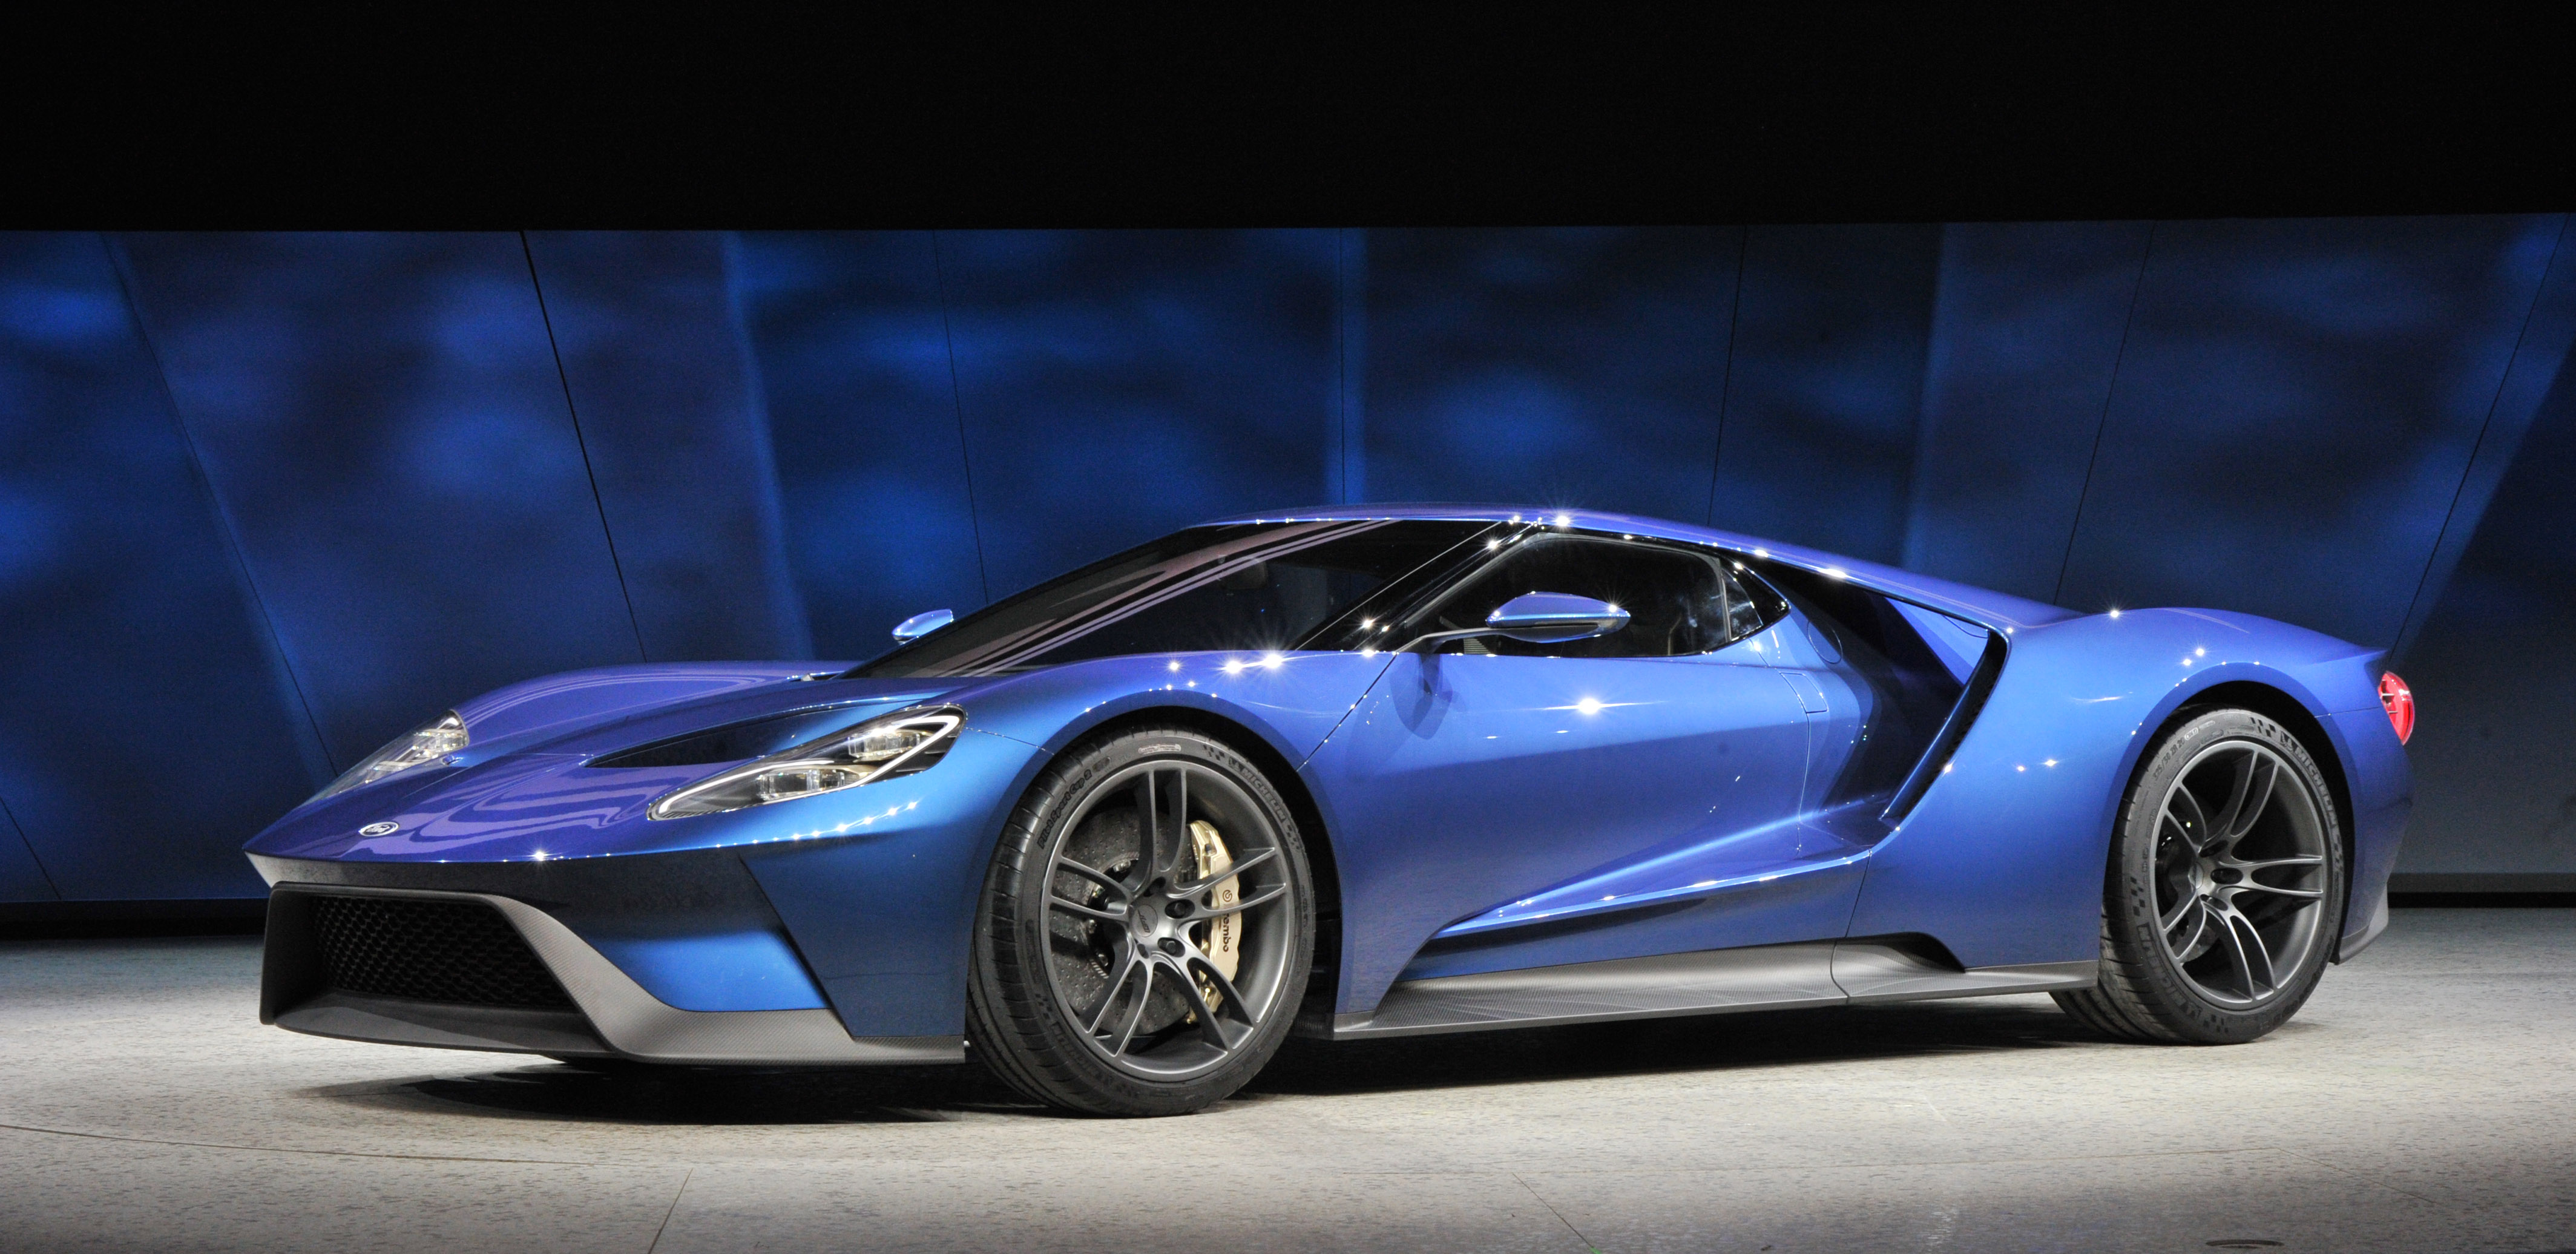 The all-new Ford GT was introduced to journalists from around the world at the North American International Auto Show, January 12, 2015.